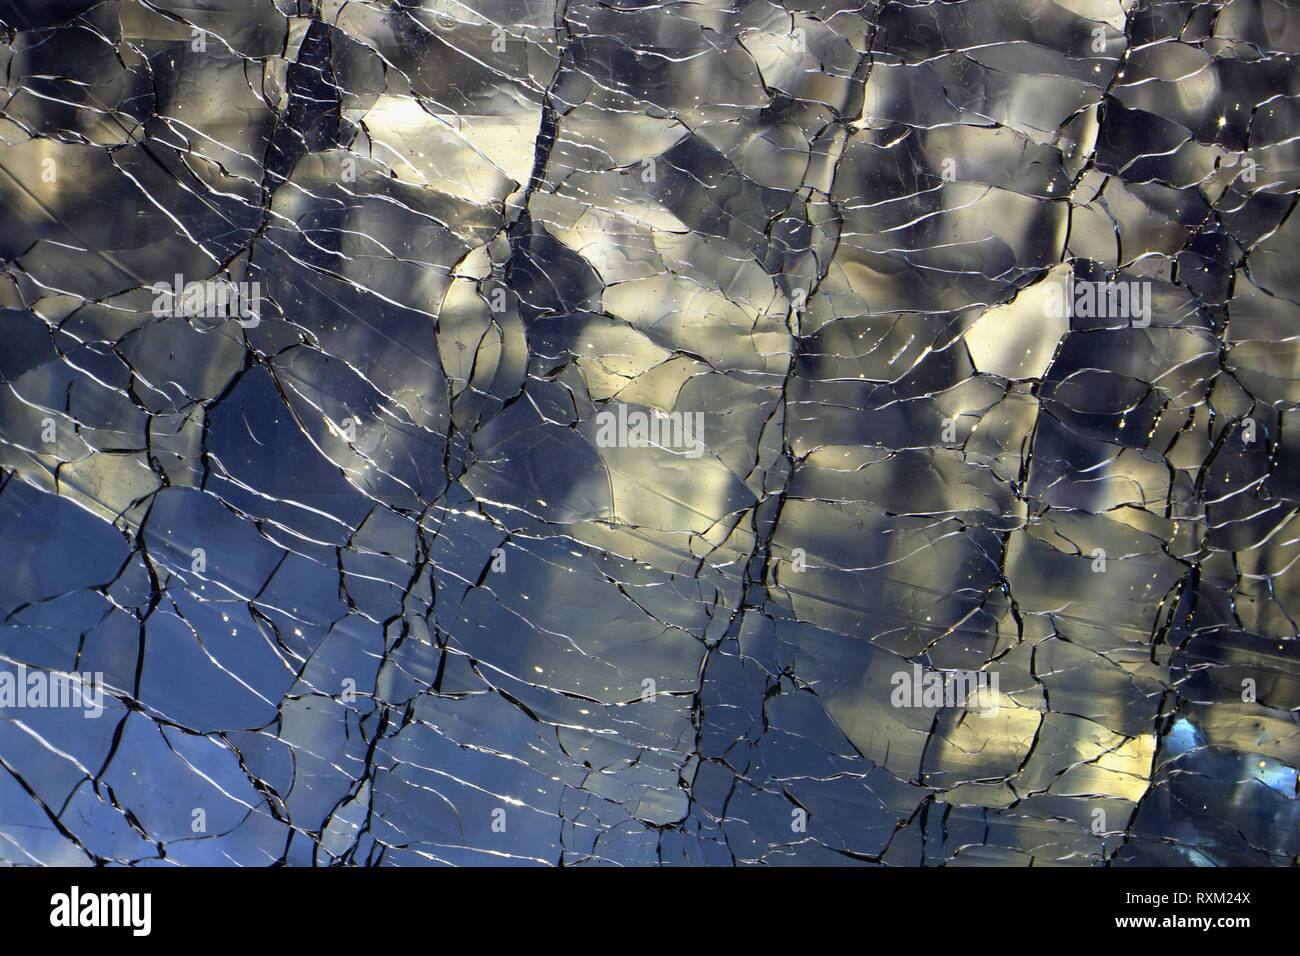 Abstract background of illuminated broken glass. Luxury, creative design backdrop of cracked, shattered glass texture. Stock Photo